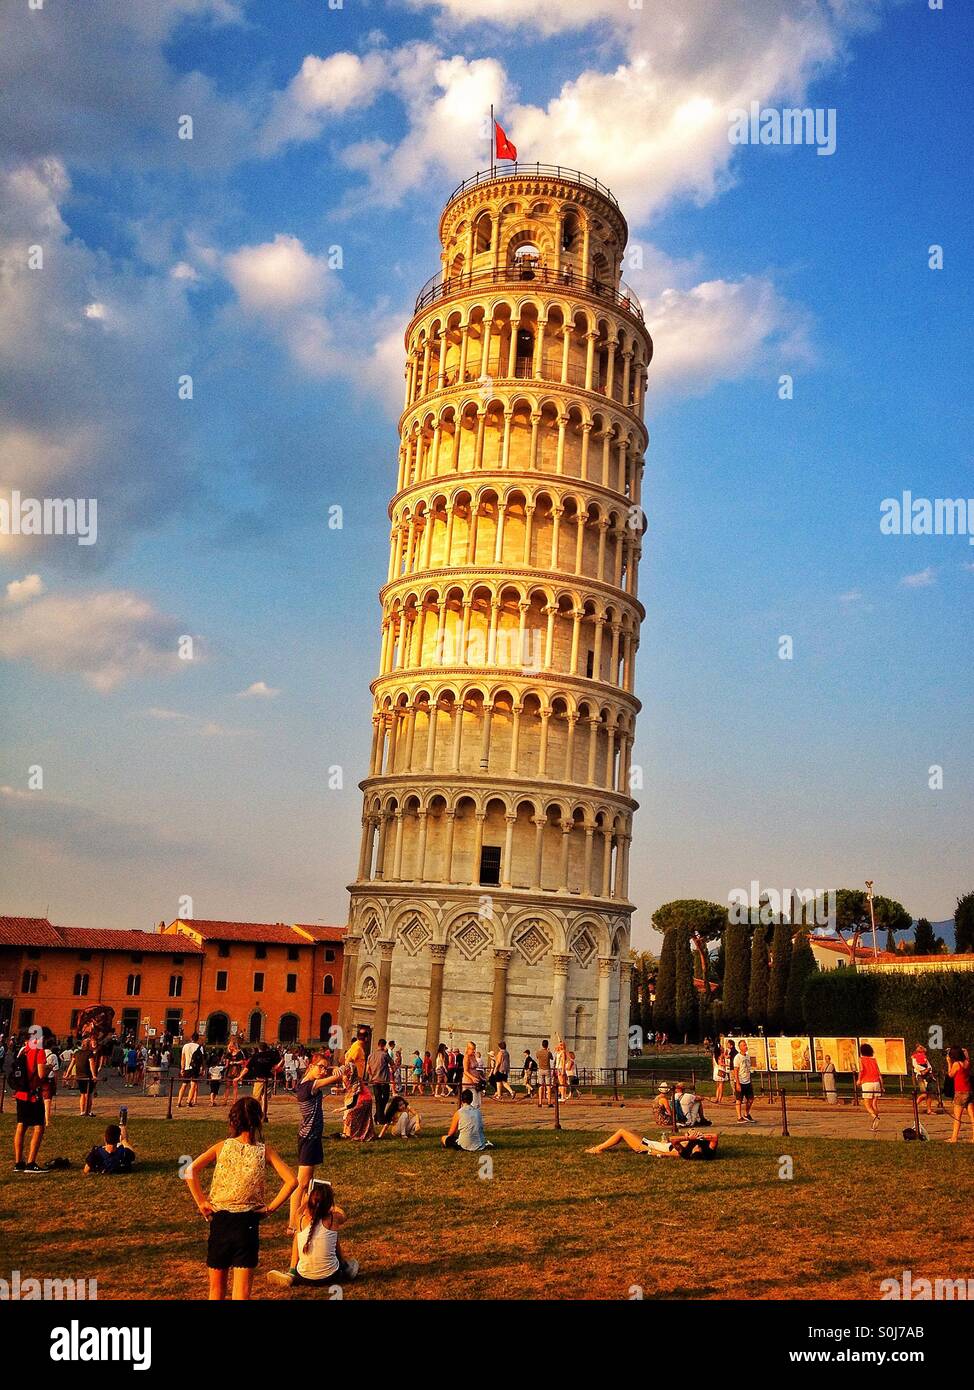 Leaning tower of Pisa Italy Stock Photo